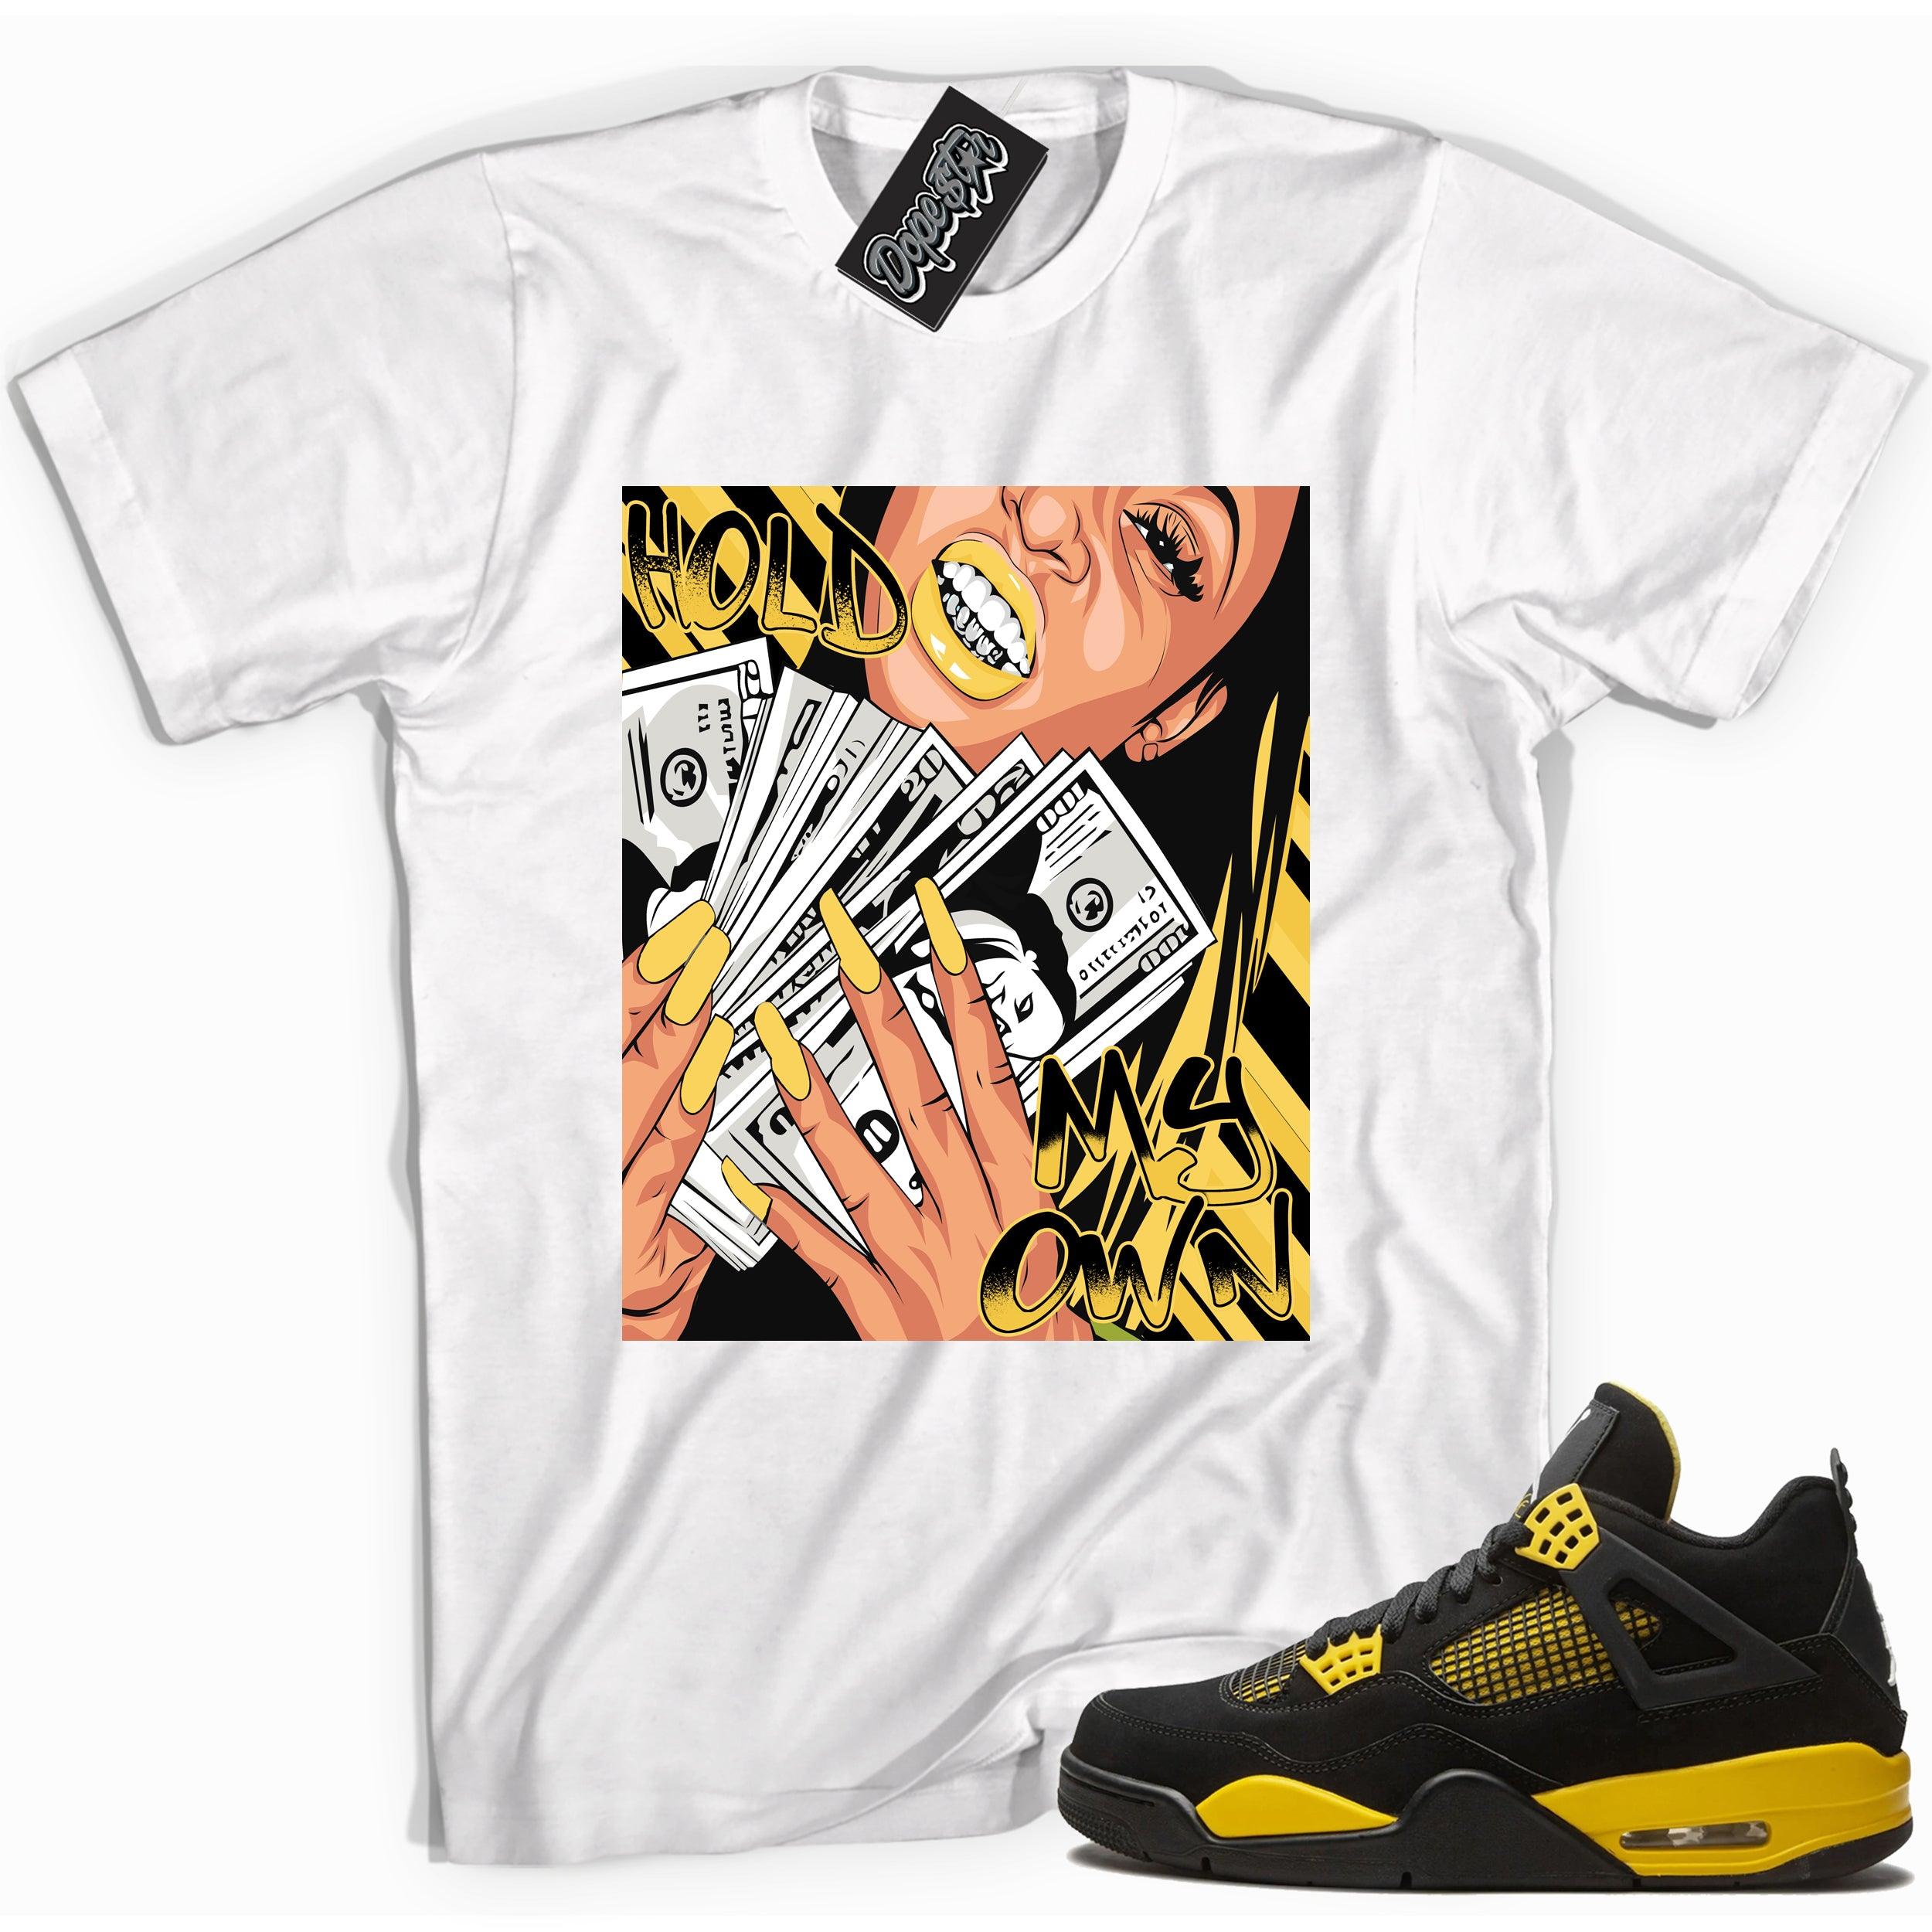 Cool white graphic tee with 'hold my own' print, that perfectly matches Air Jordan 4 Thunder sneakers